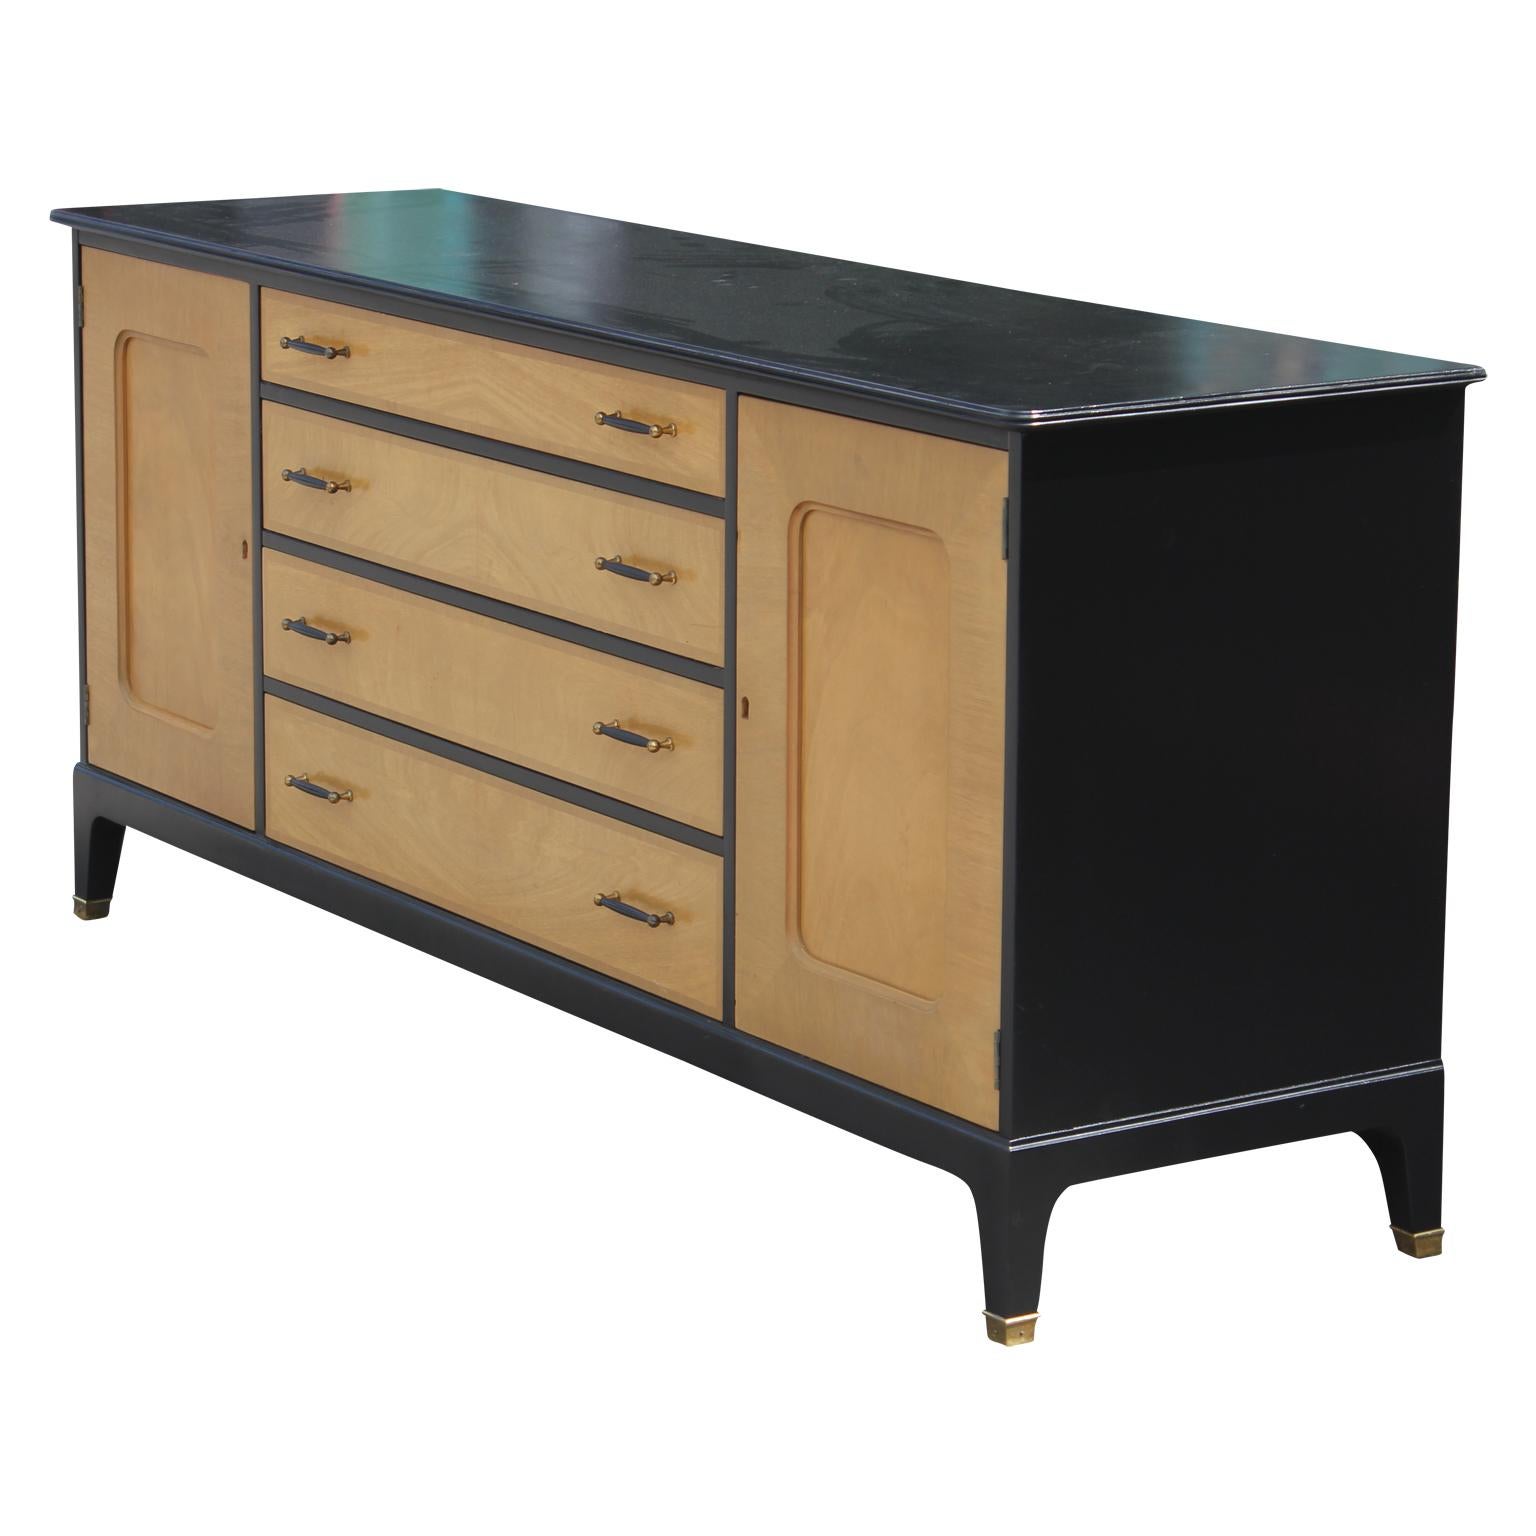 Hollywood Regency Modern Two-Tone Four-Drawer Credenza or Sideboard by Johnson Furniture